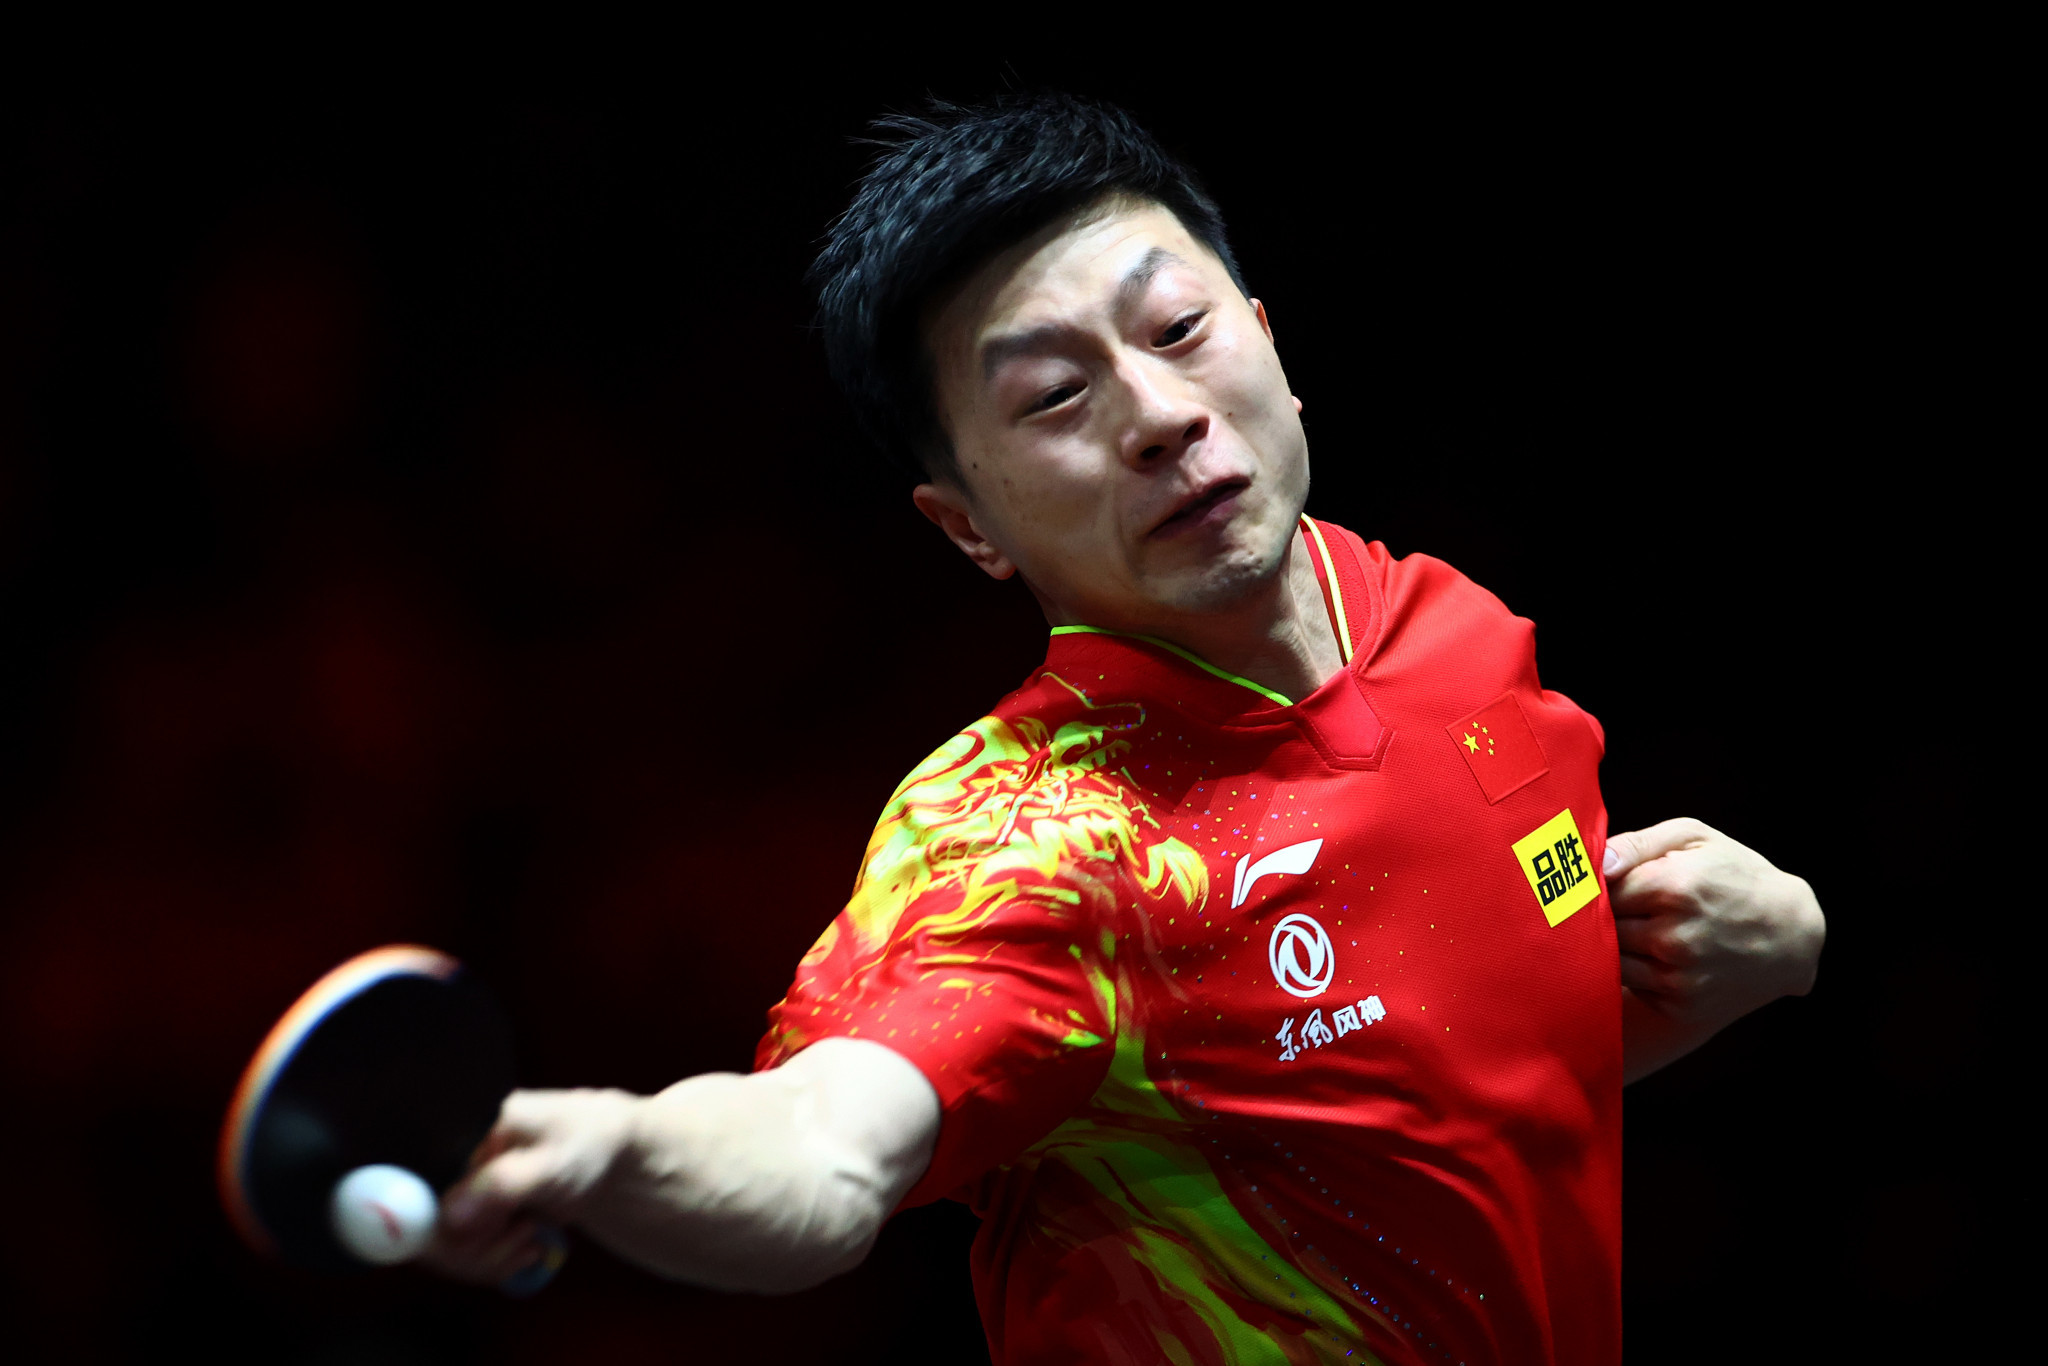 Defending champions China name strong line-up for World Team Table Tennis Championships